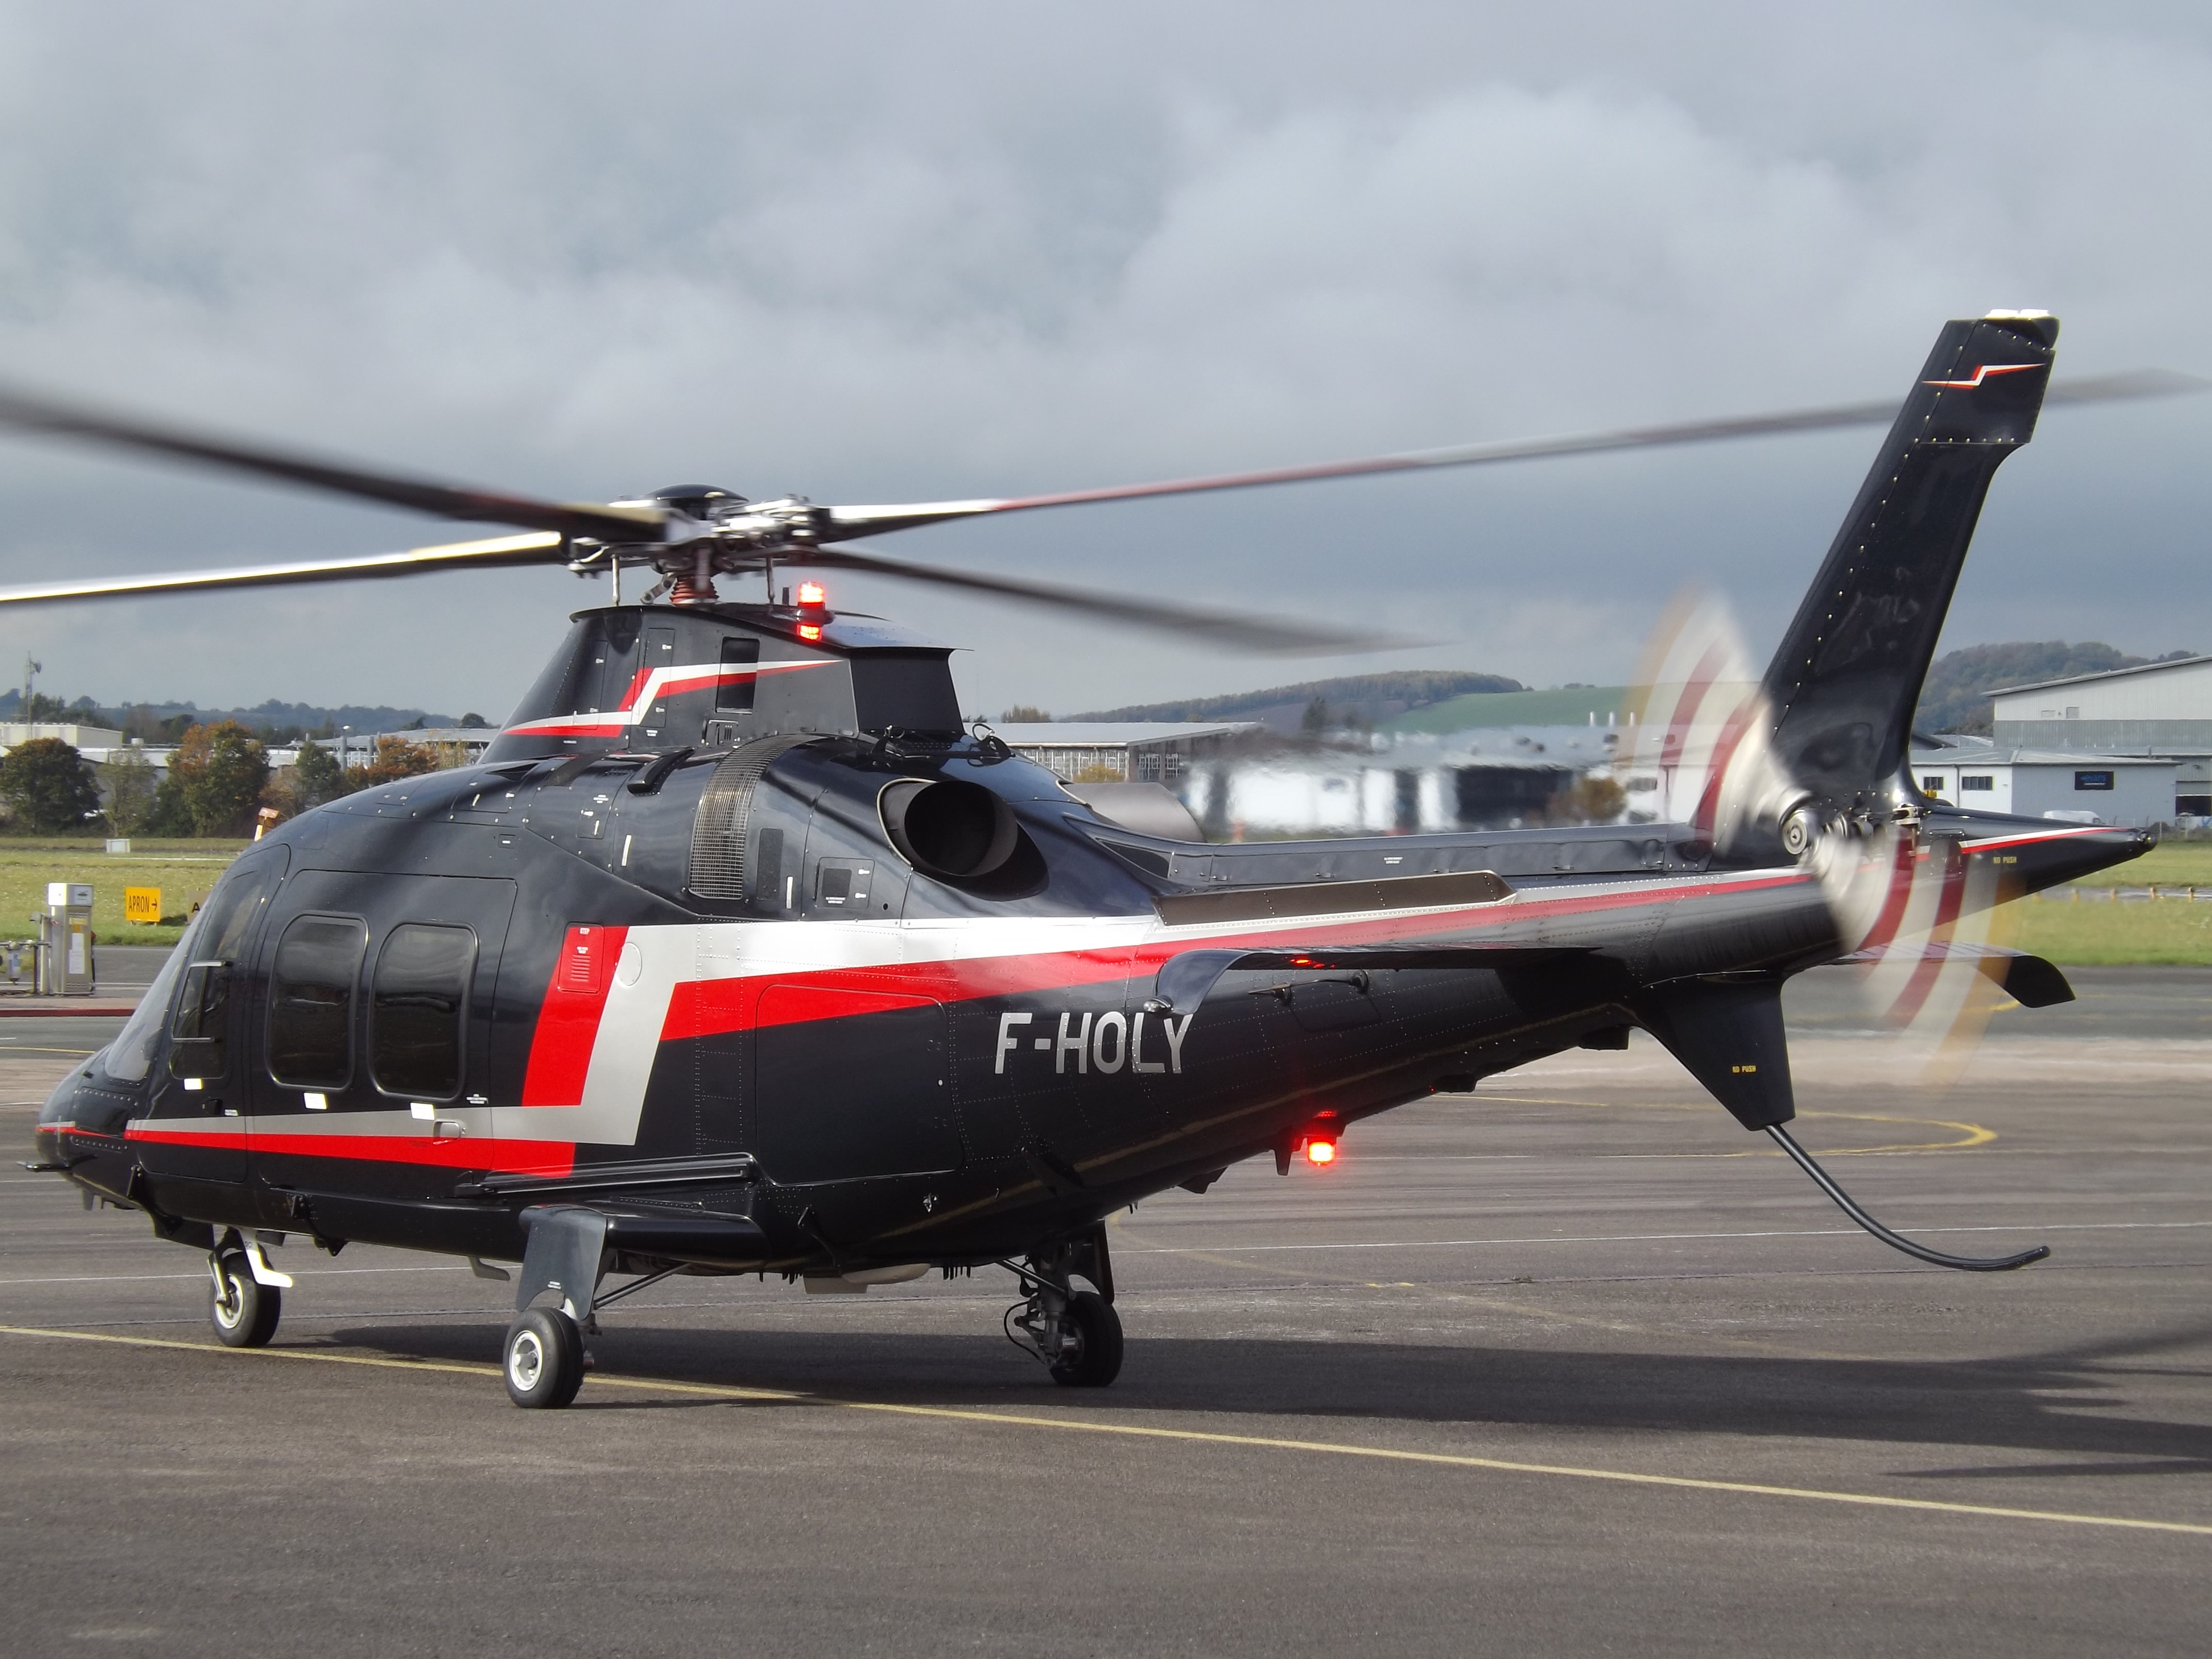 AgustaWestland: Elevating Business Travel with Cutting-Edge Technology and Impeccable Craftsmanship